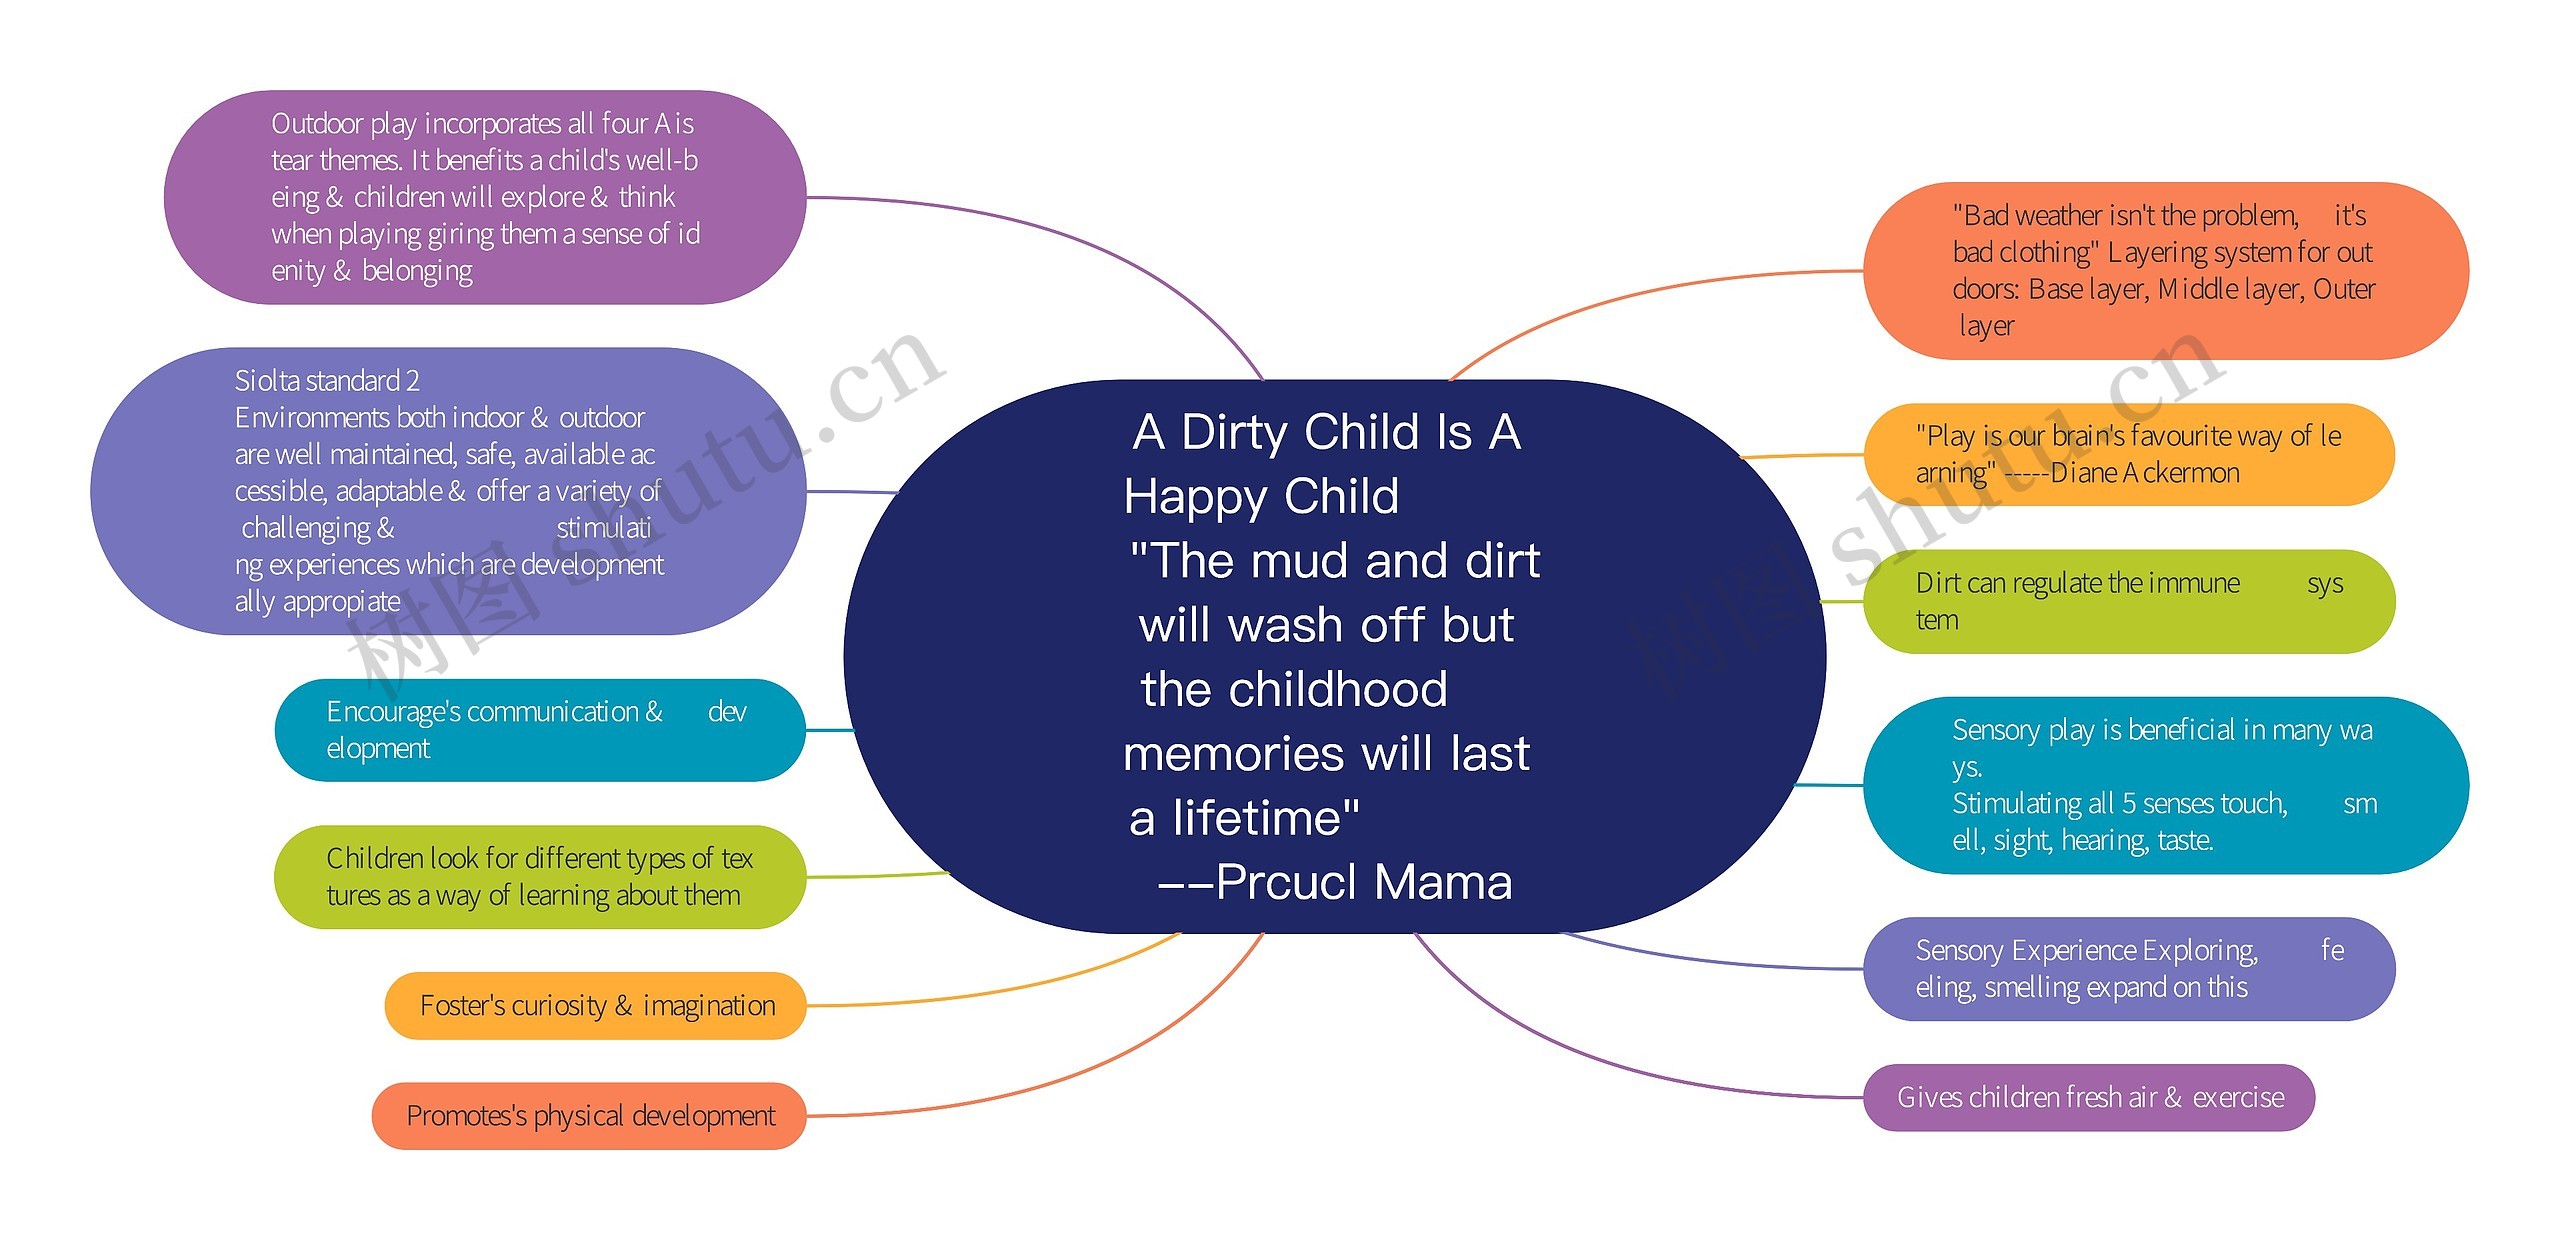 A Dirty Child Is A Happy Child         "The mud and dirt will wash off but   the childhood      memories will last a lifetime